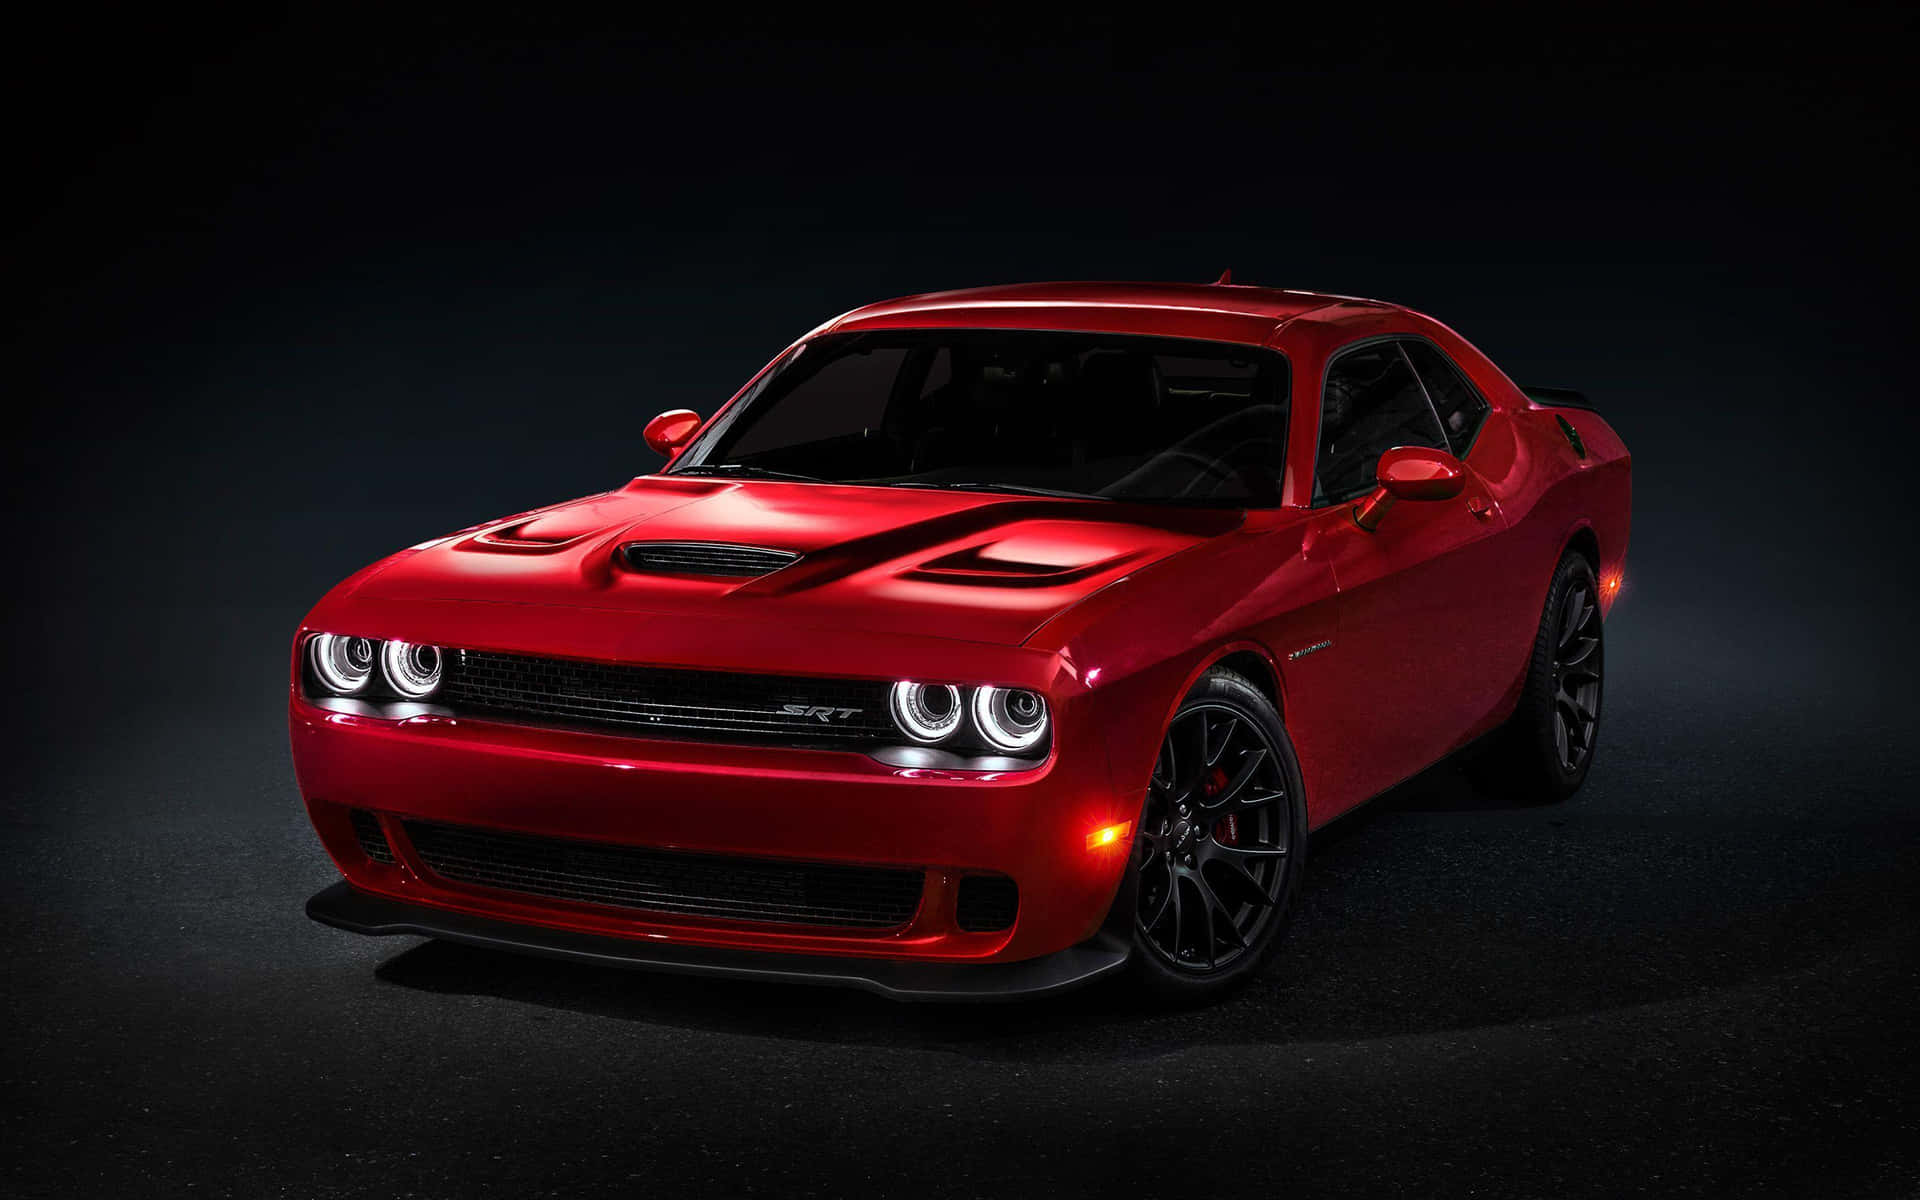 The Red Dodge Challenger Is Shown In A Dark Room Wallpaper